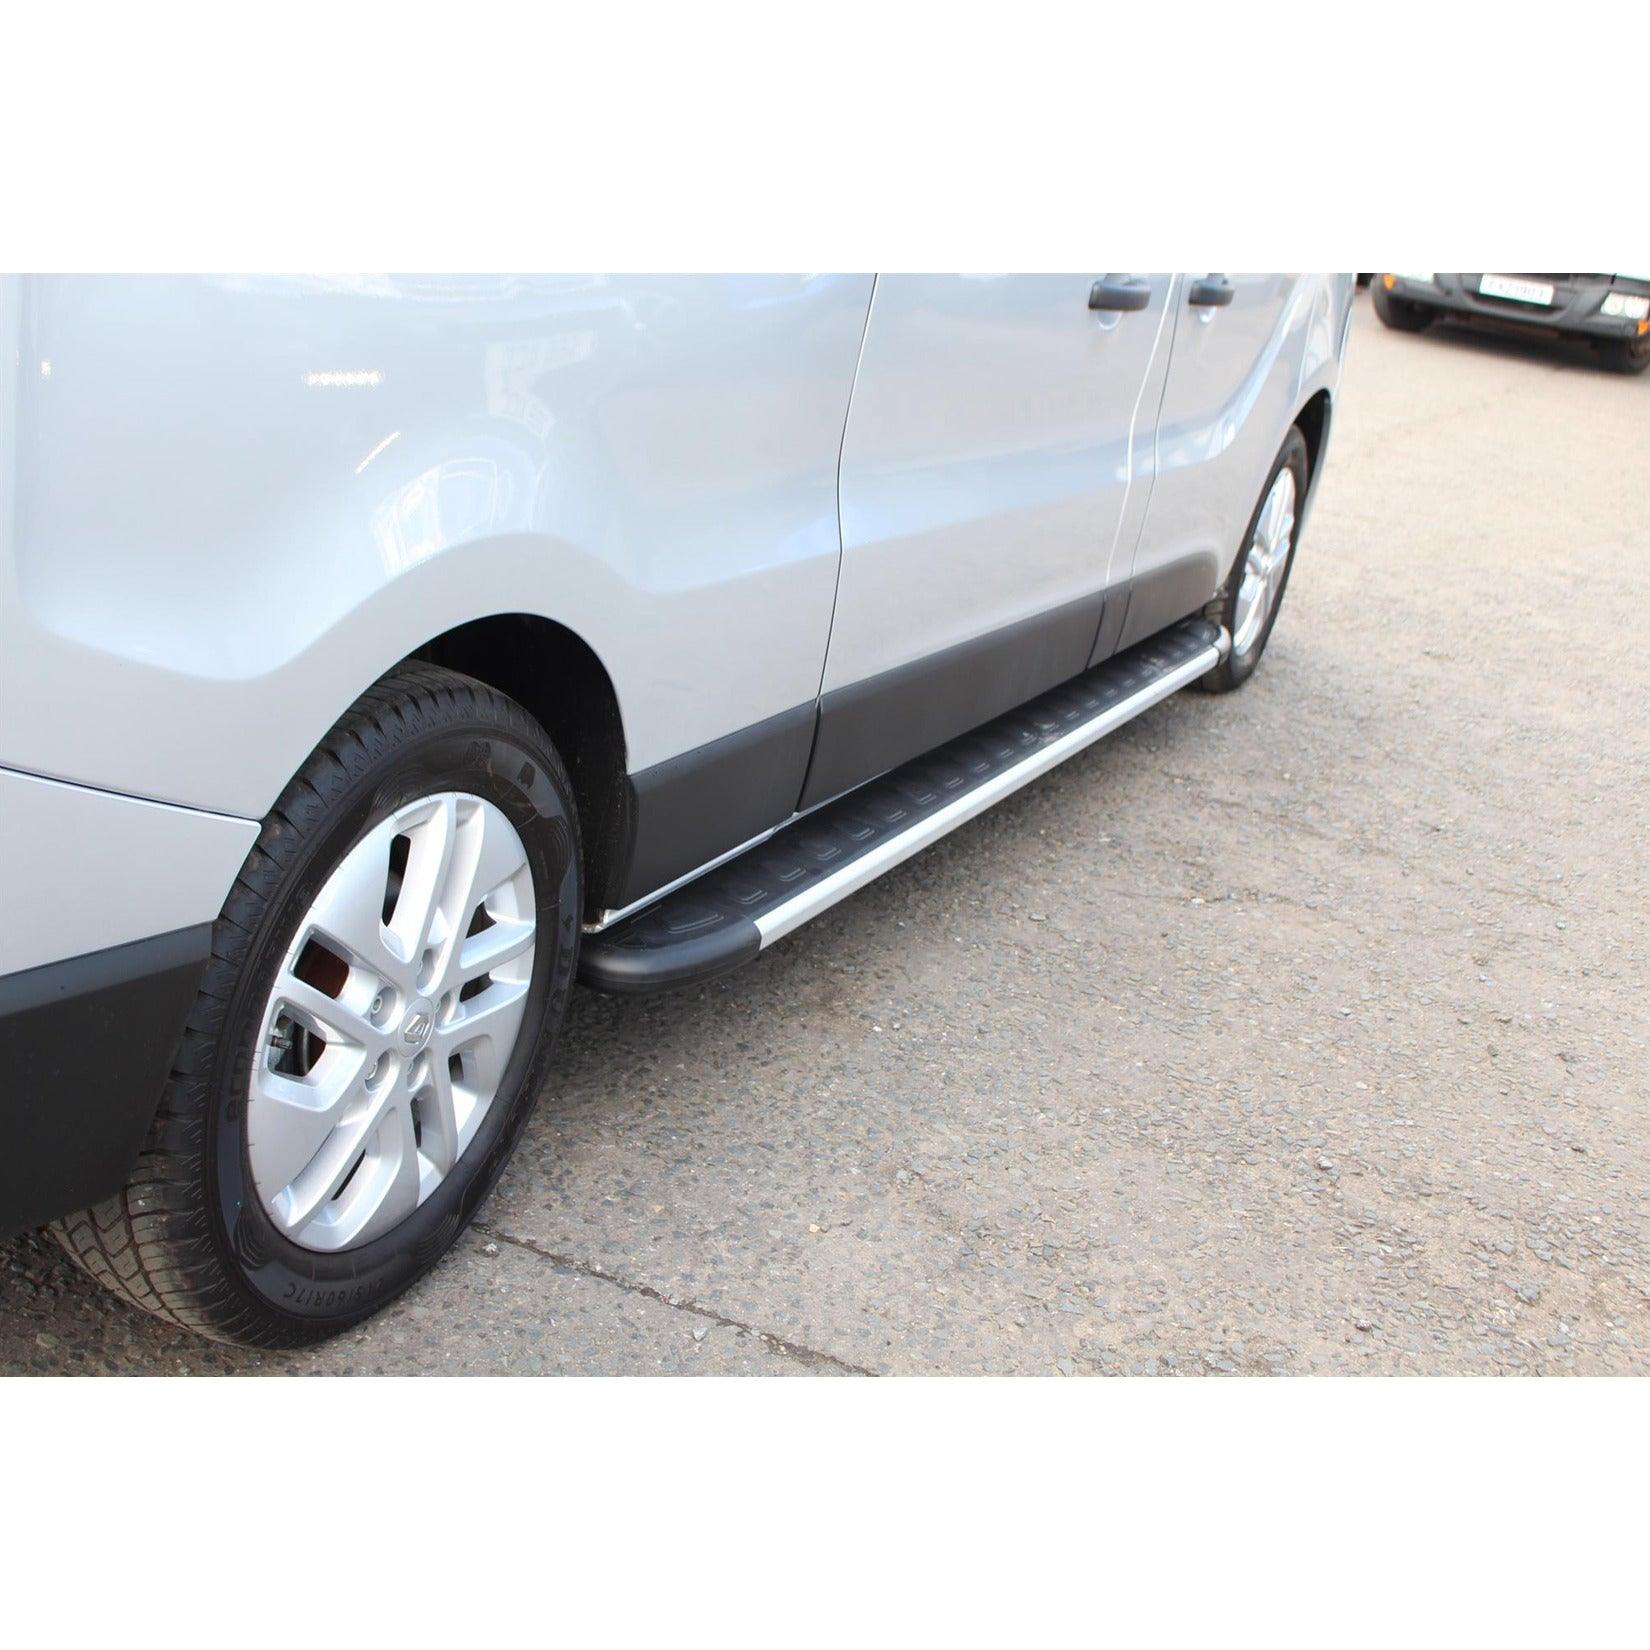 VW TRANSPORTER T6 & T6.1 2016 ON SHORT WHEEL BASE PLANET RUNNING BOARDS - PAIR - Storm Xccessories2